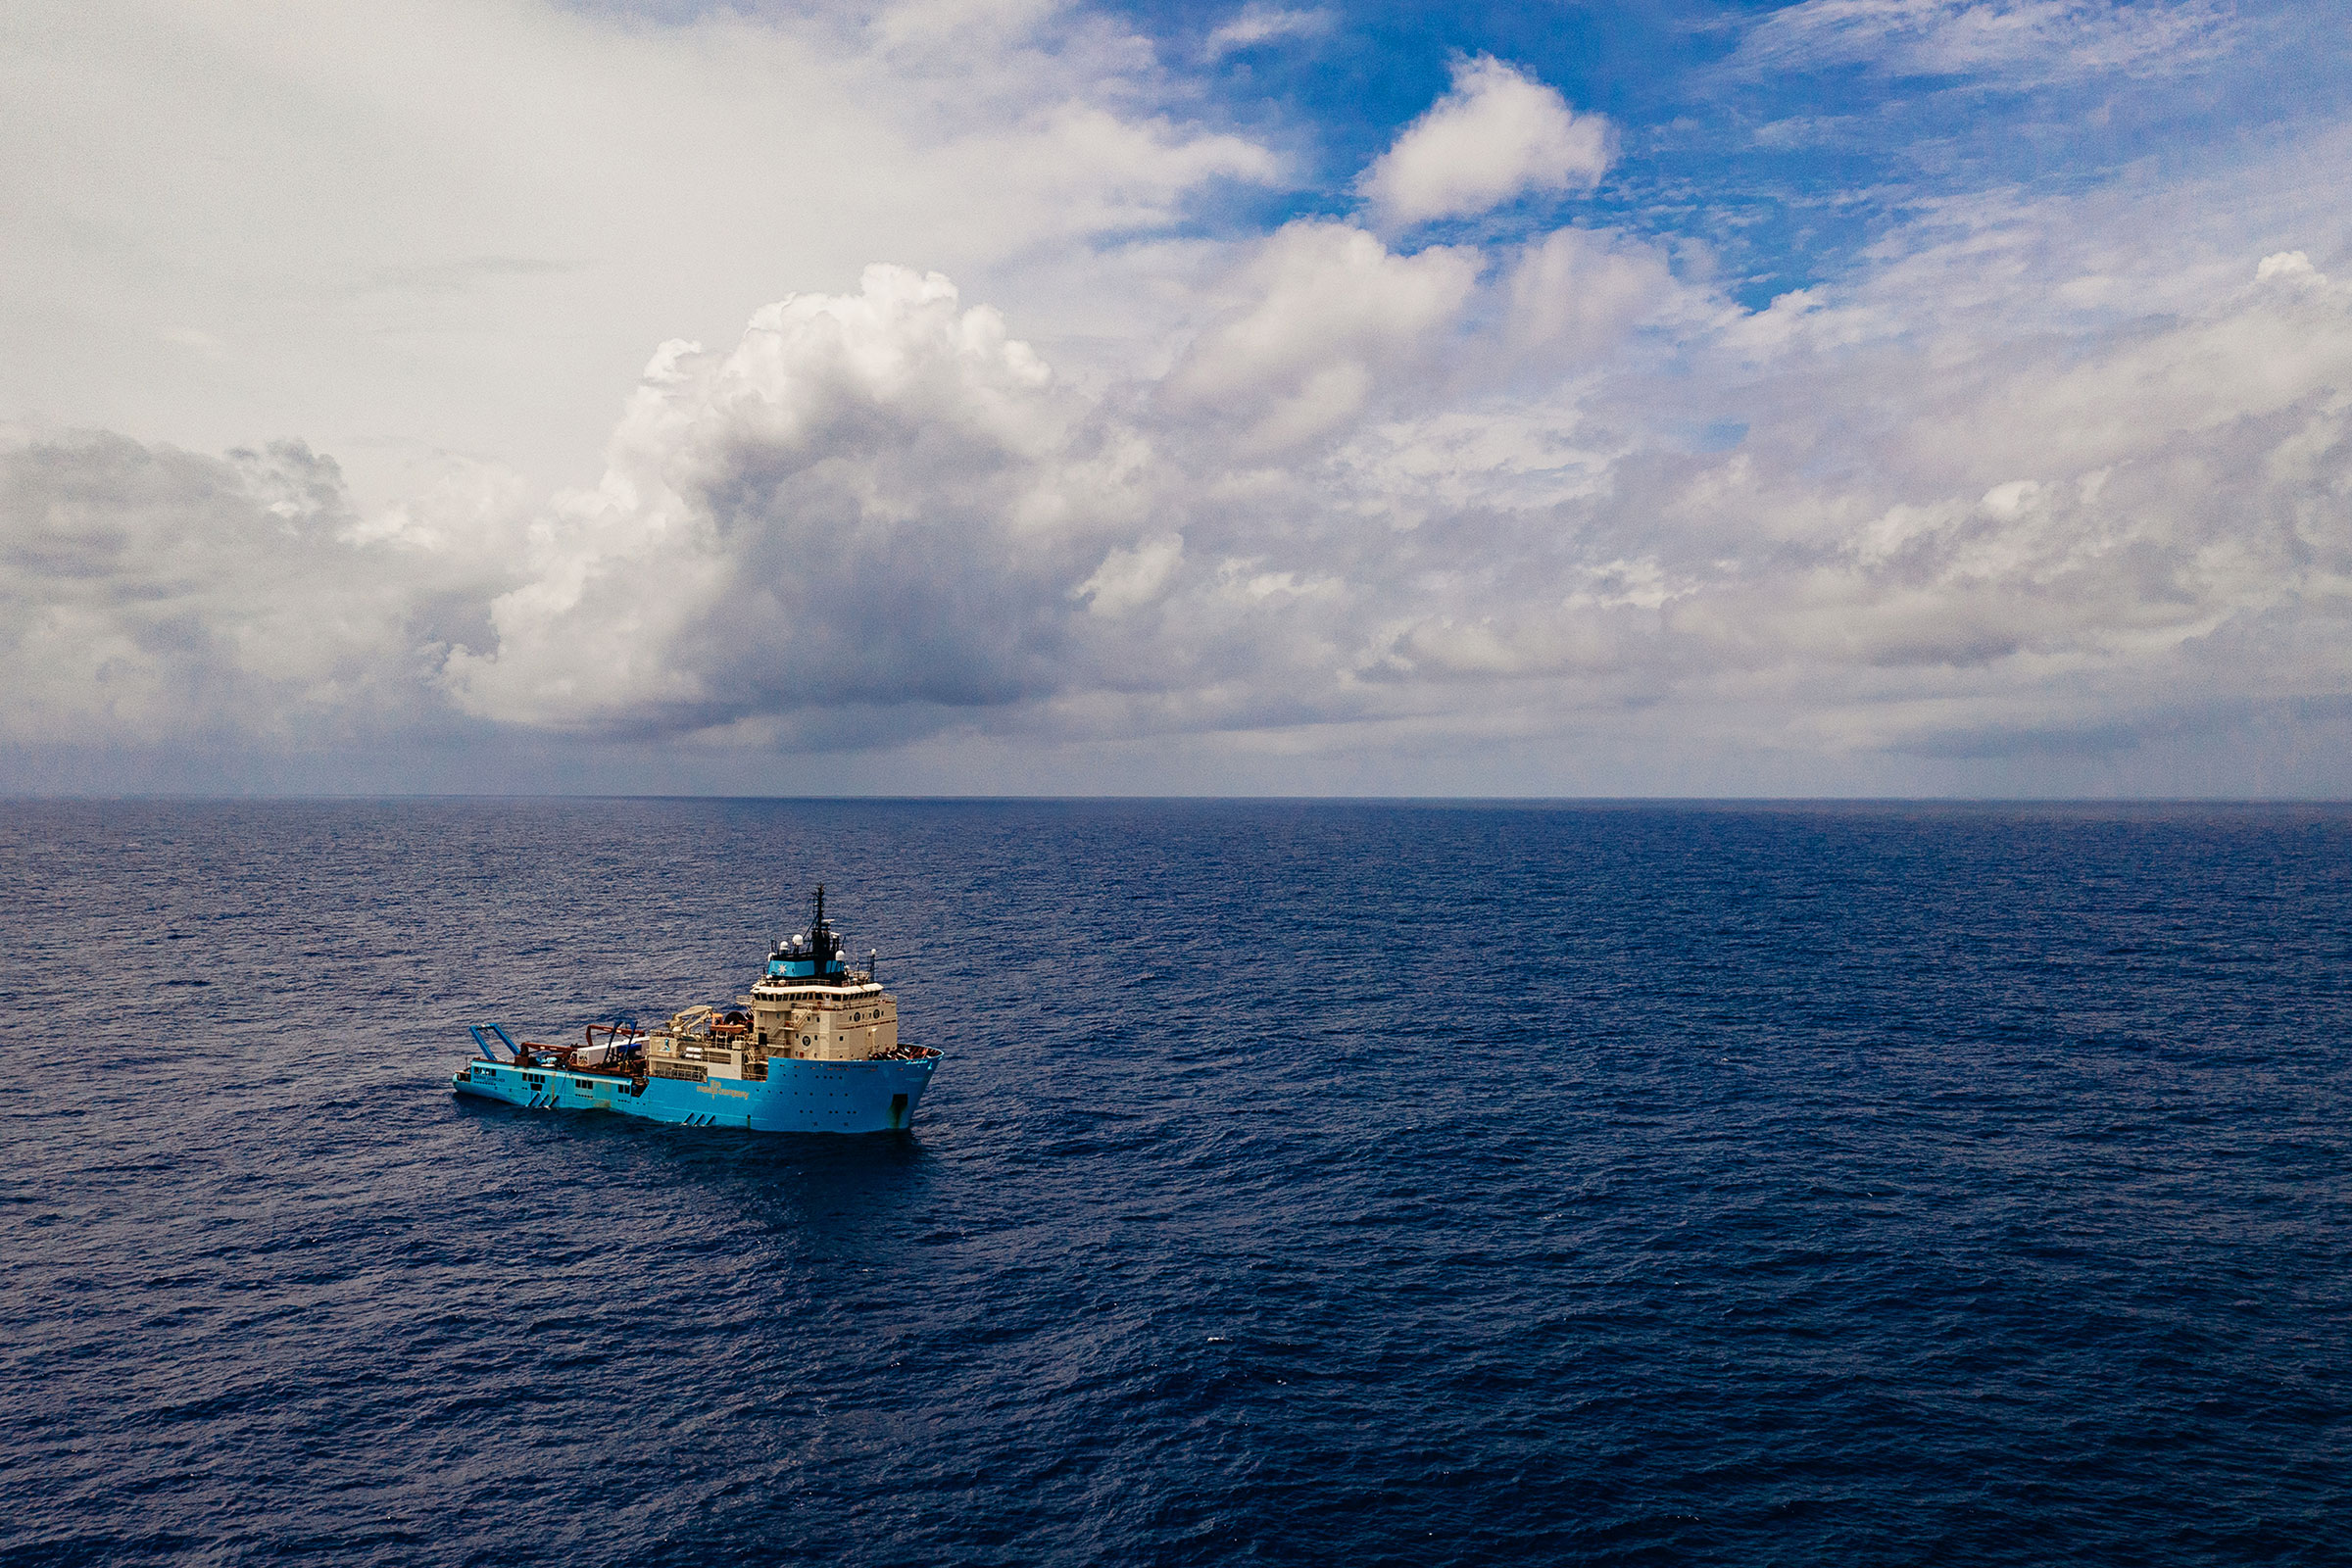 The Metals Company’s exploratory vessel, the Maersk Launcher, conducting environmental studies in the CCZ. (Courtesy The Metals Company)